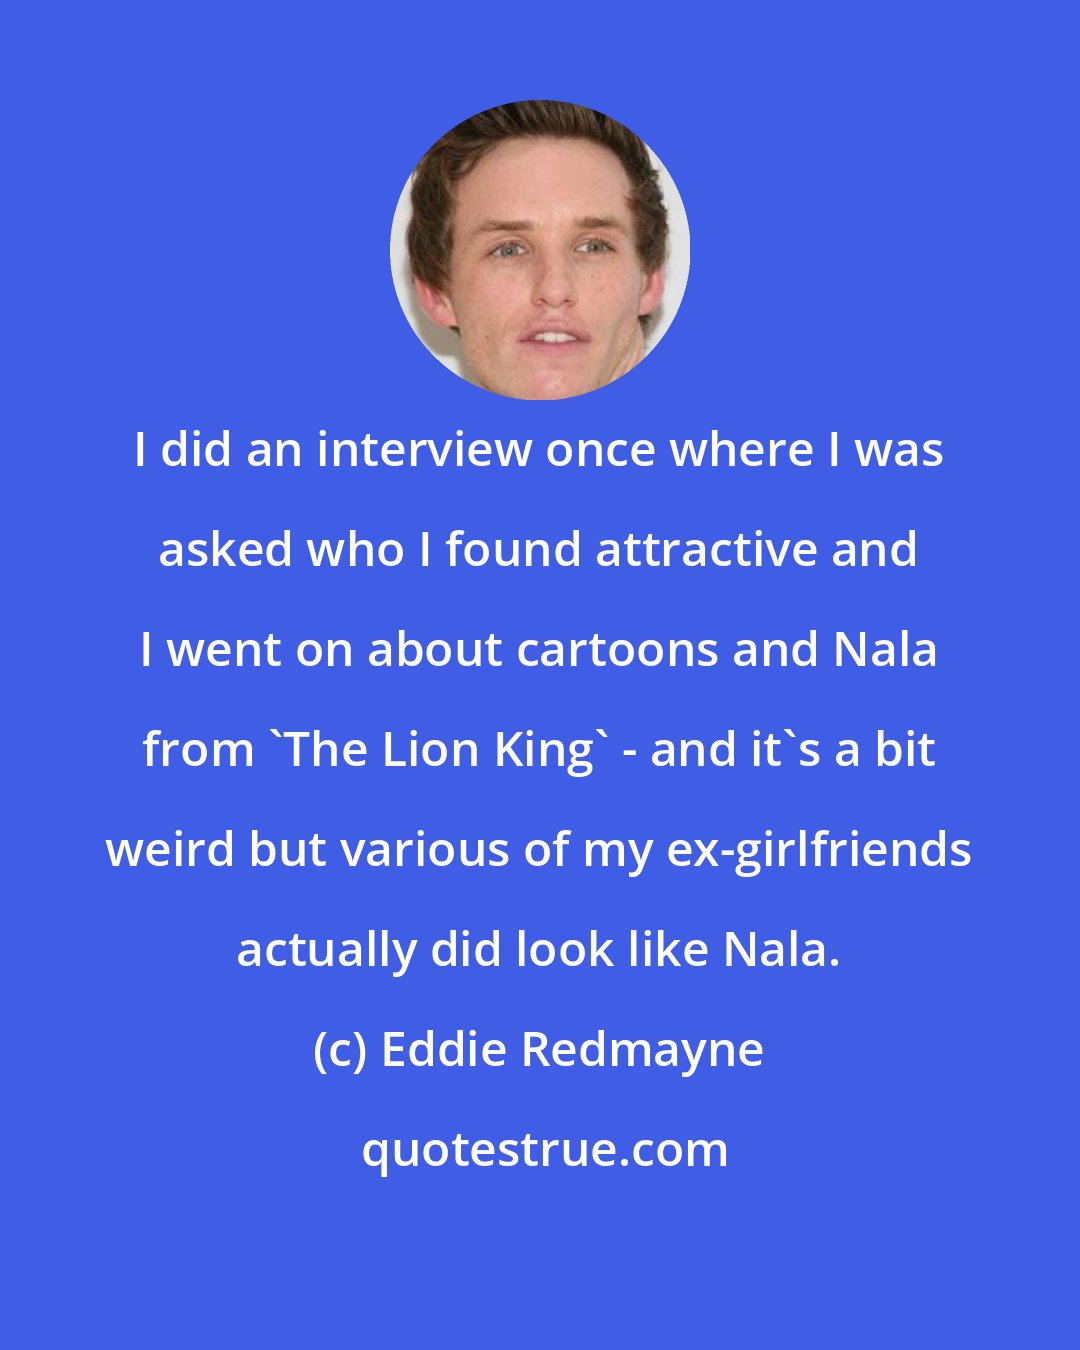 Eddie Redmayne: I did an interview once where I was asked who I found attractive and I went on about cartoons and Nala from 'The Lion King' - and it's a bit weird but various of my ex-girlfriends actually did look like Nala.